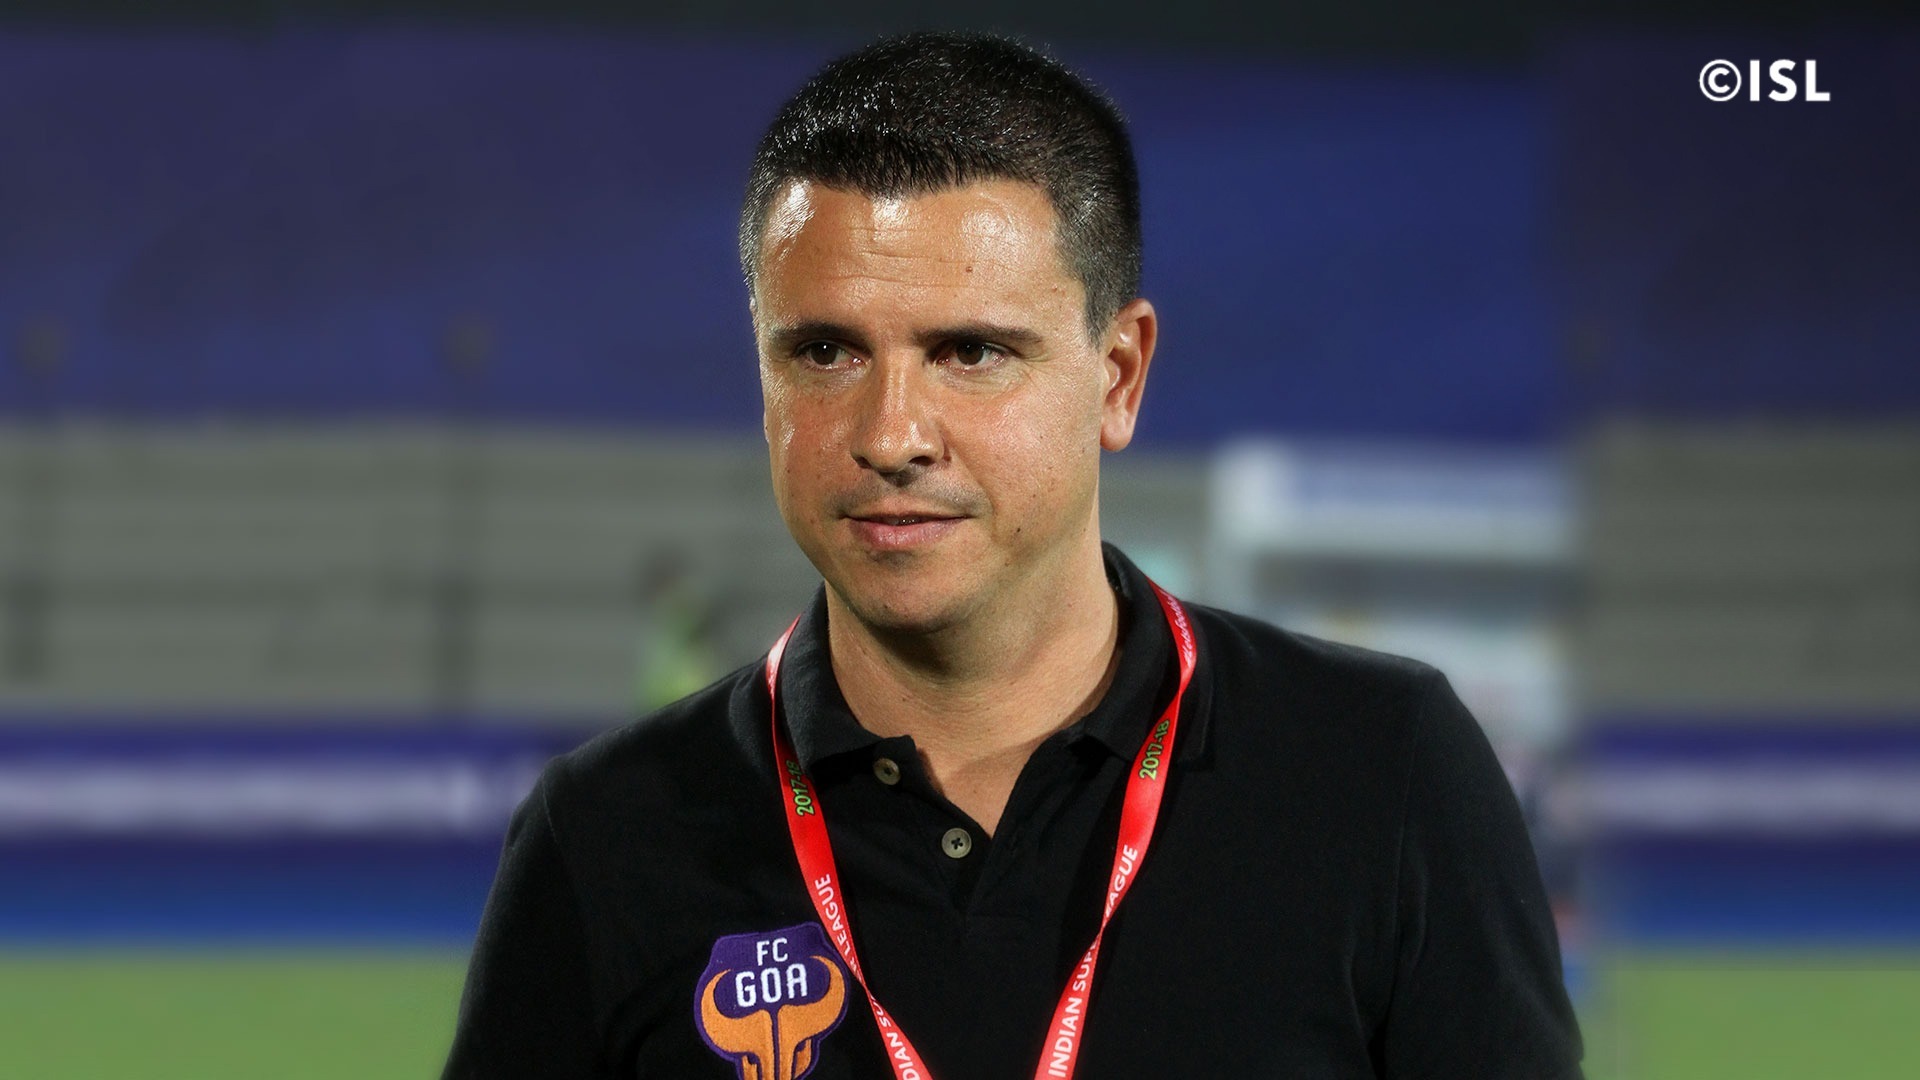 ISL 2019-20 | Goa played very well in different circumstances, says Sergio Lobera